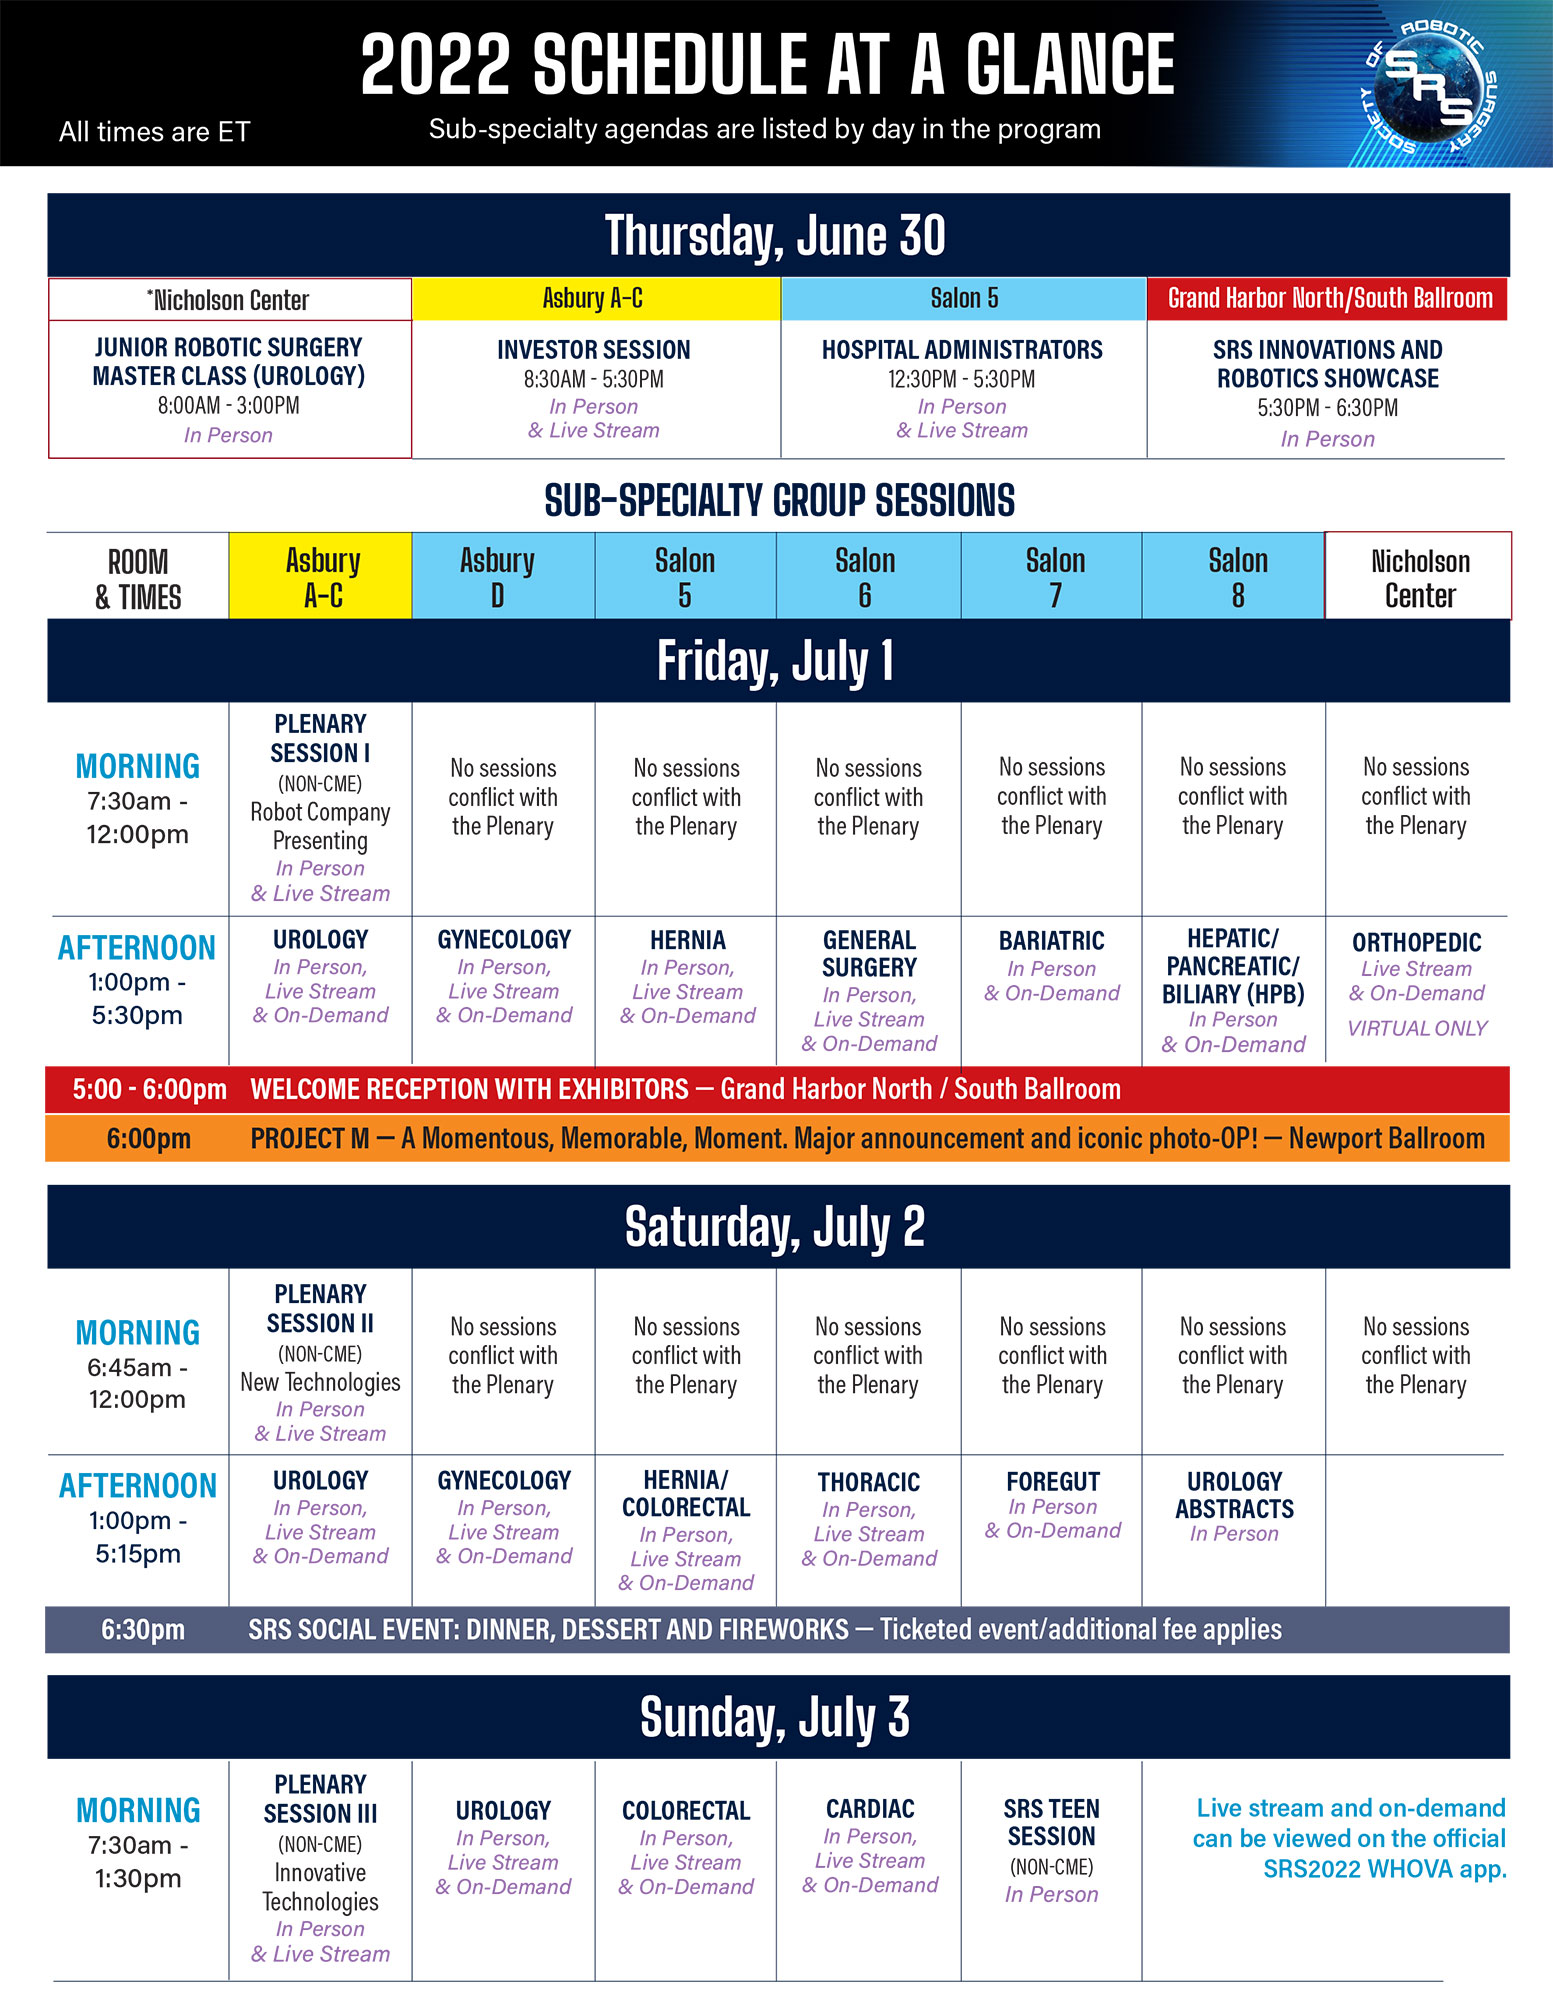 Schedule at a Glance SRS 2022